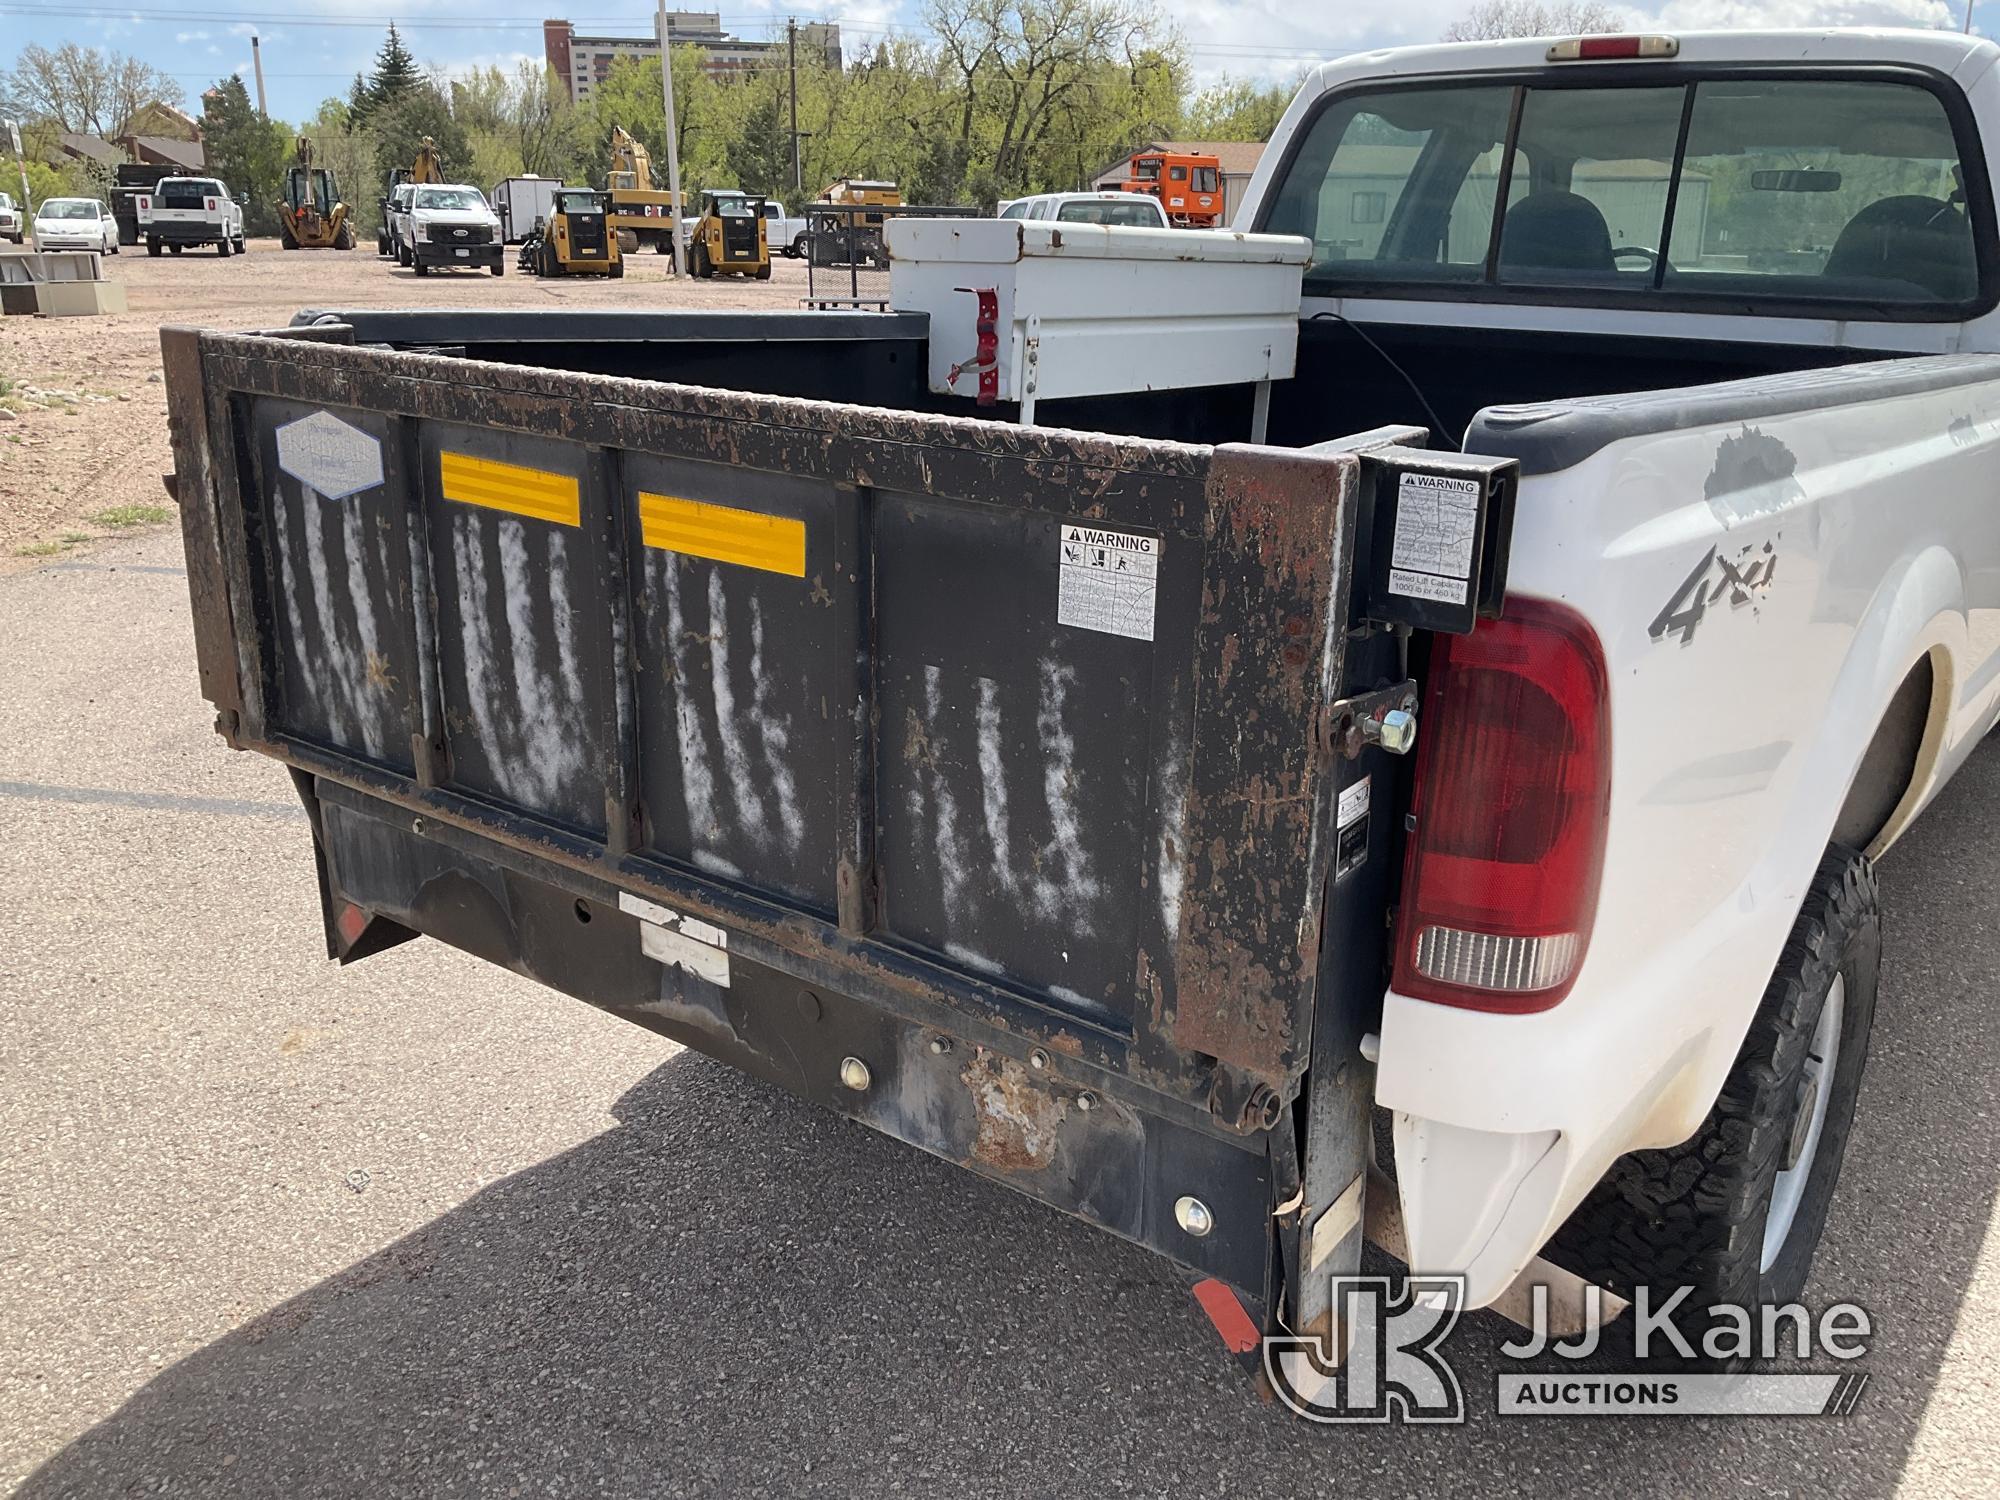 (Castle Rock, CO) 2002 Ford F350 4x4 Crew-Cab Pickup Truck Runs & Moves)( Minor Body/Paint Damage